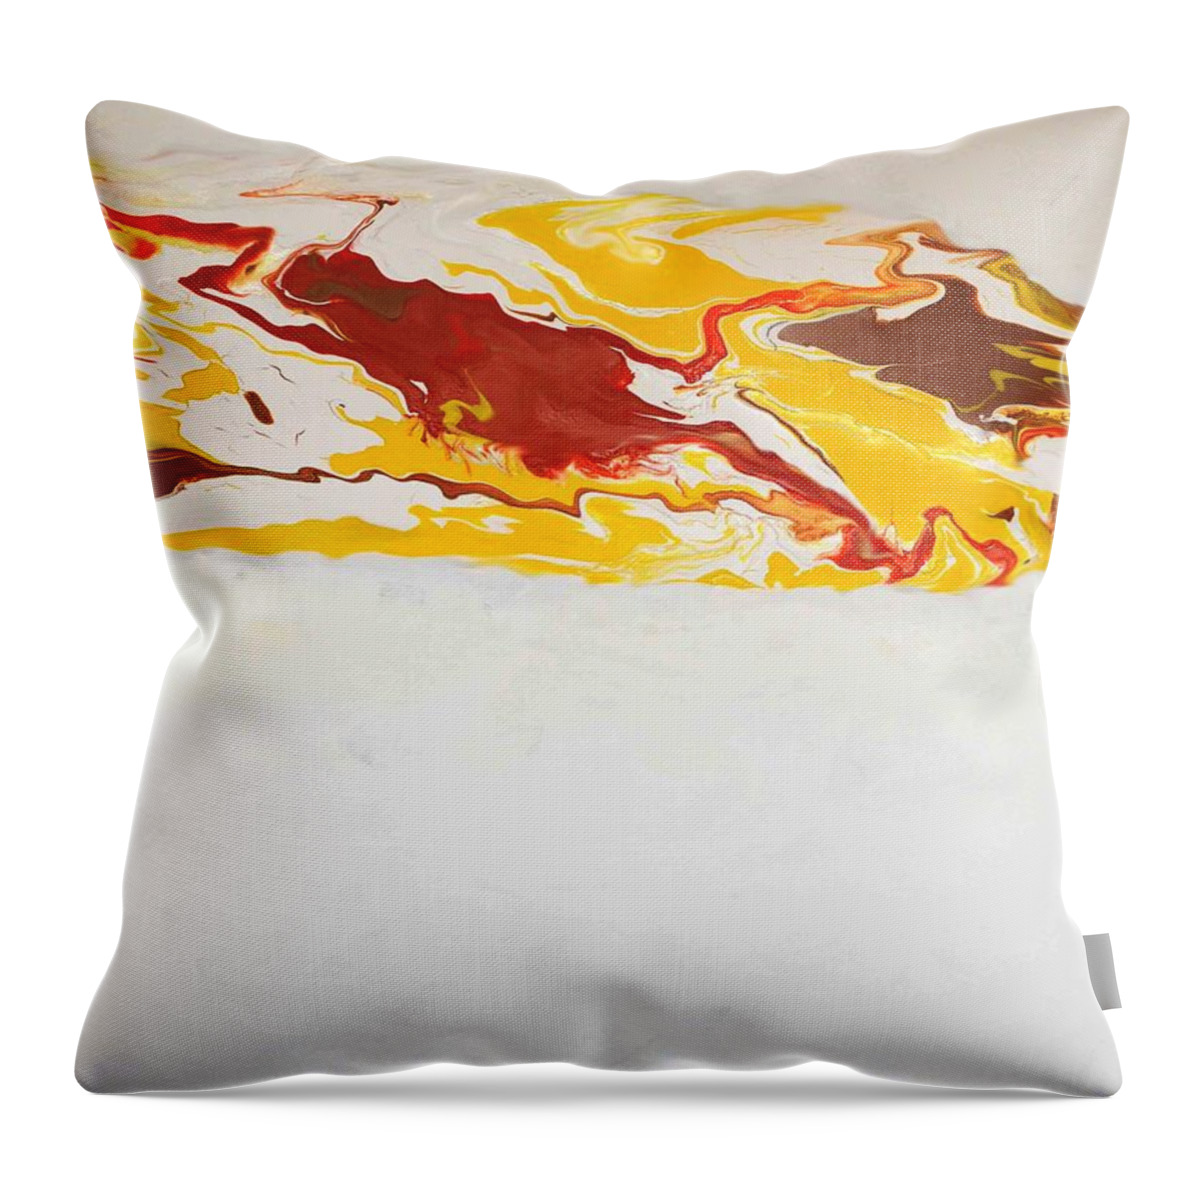 Abstract Throw Pillow featuring the painting The Free Spirit 5 by Sonali Kukreja